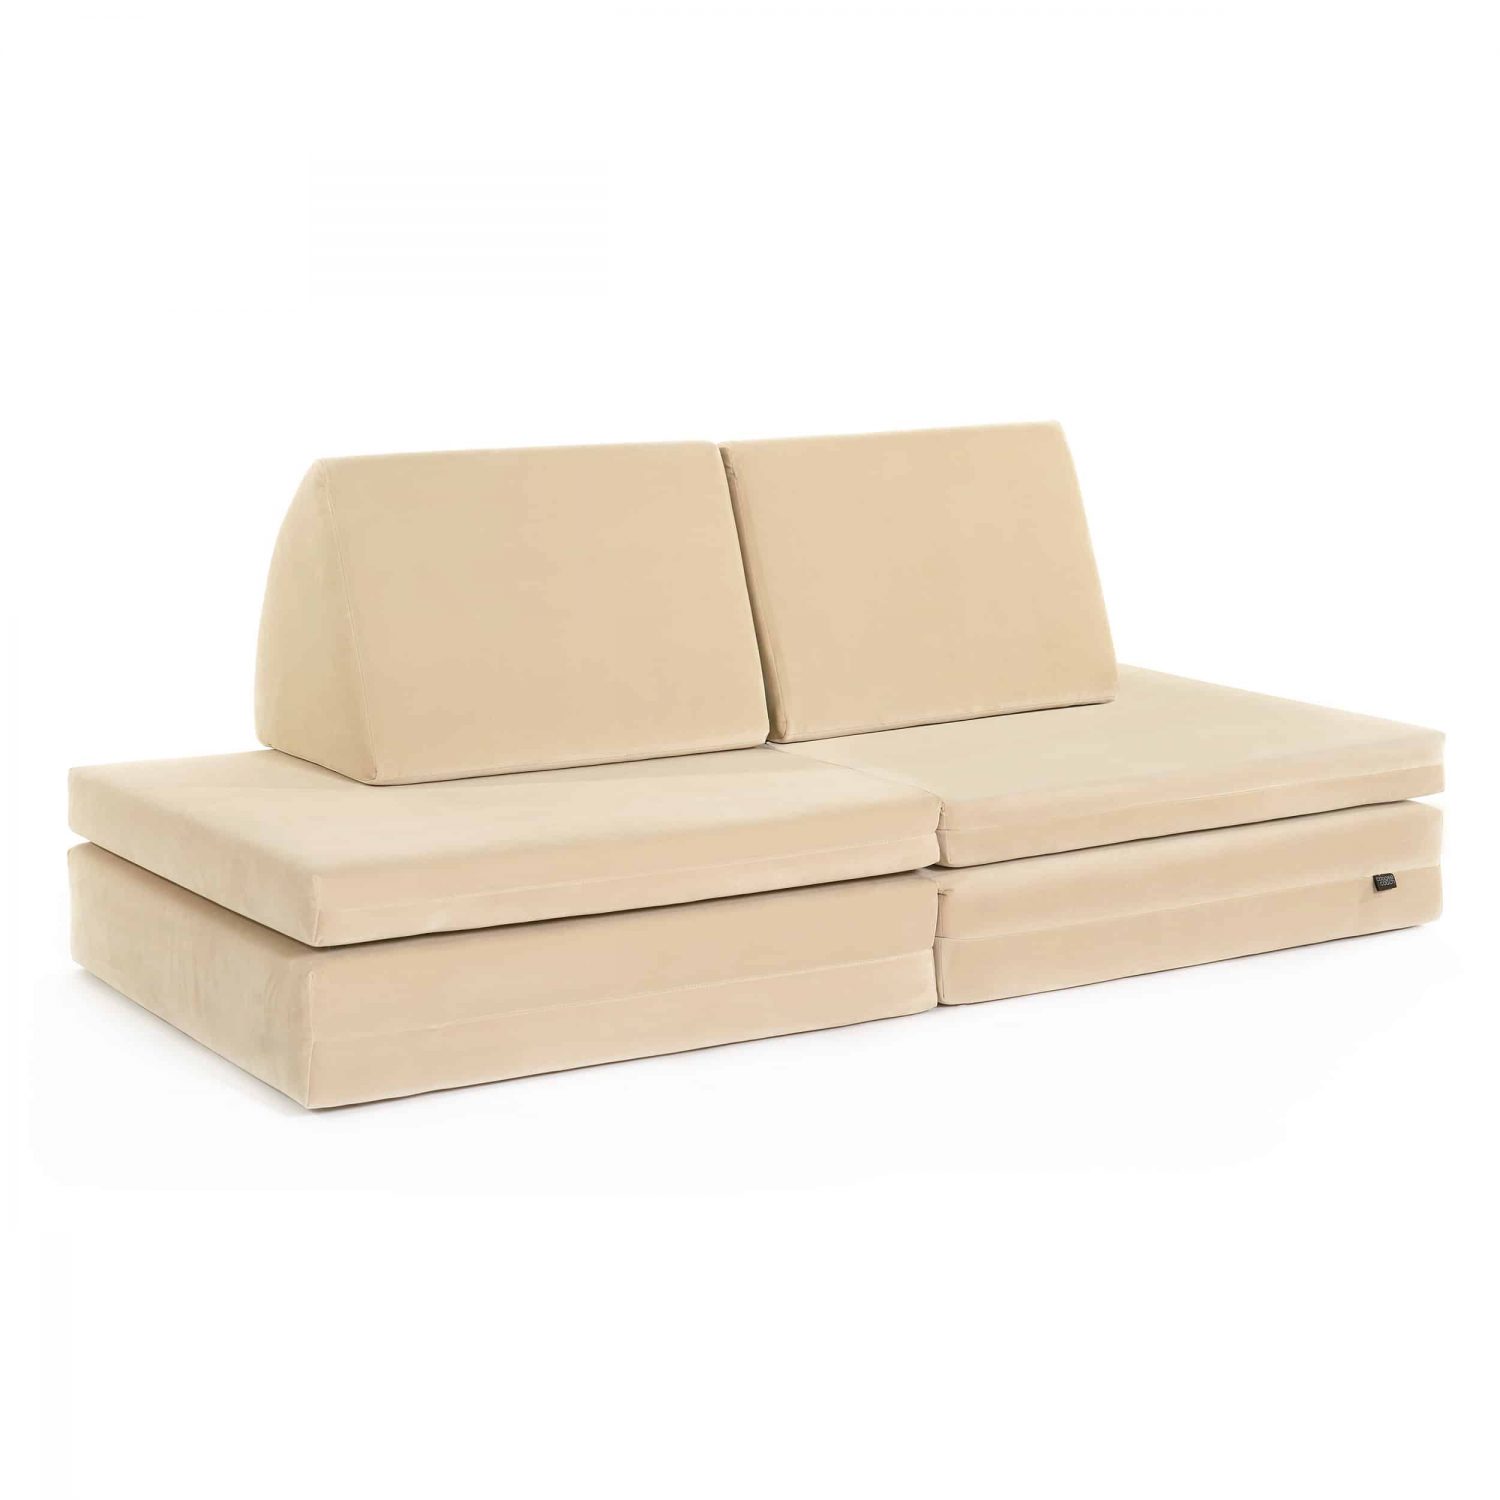 coogeecouch | Kindersofa | Serie: chasingthesand | Farbe: linen-white beige | Ansicht: Front schräg | made in Germany